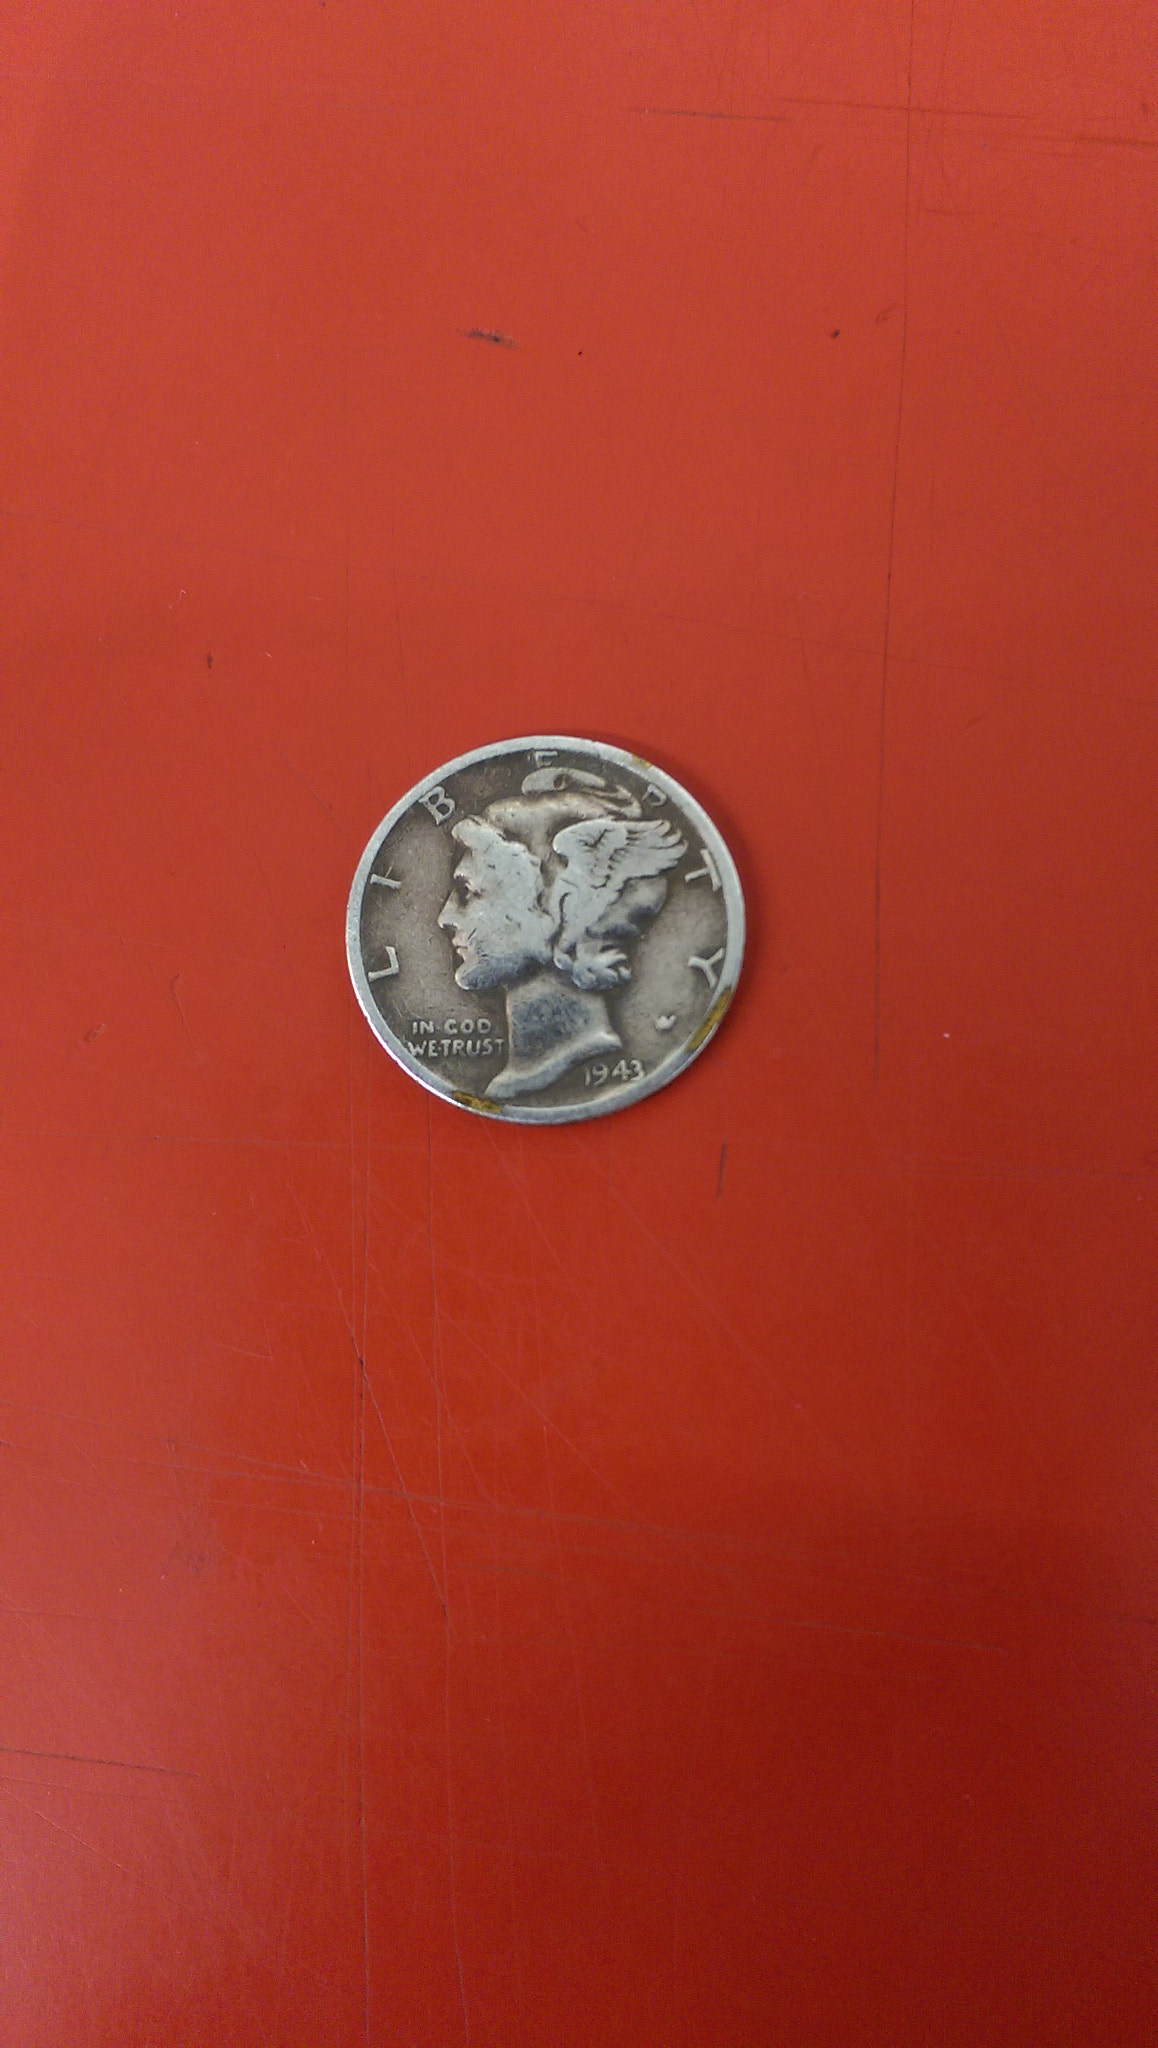 HTC ONE (M8) sample photo. Coin on scarred counter photography